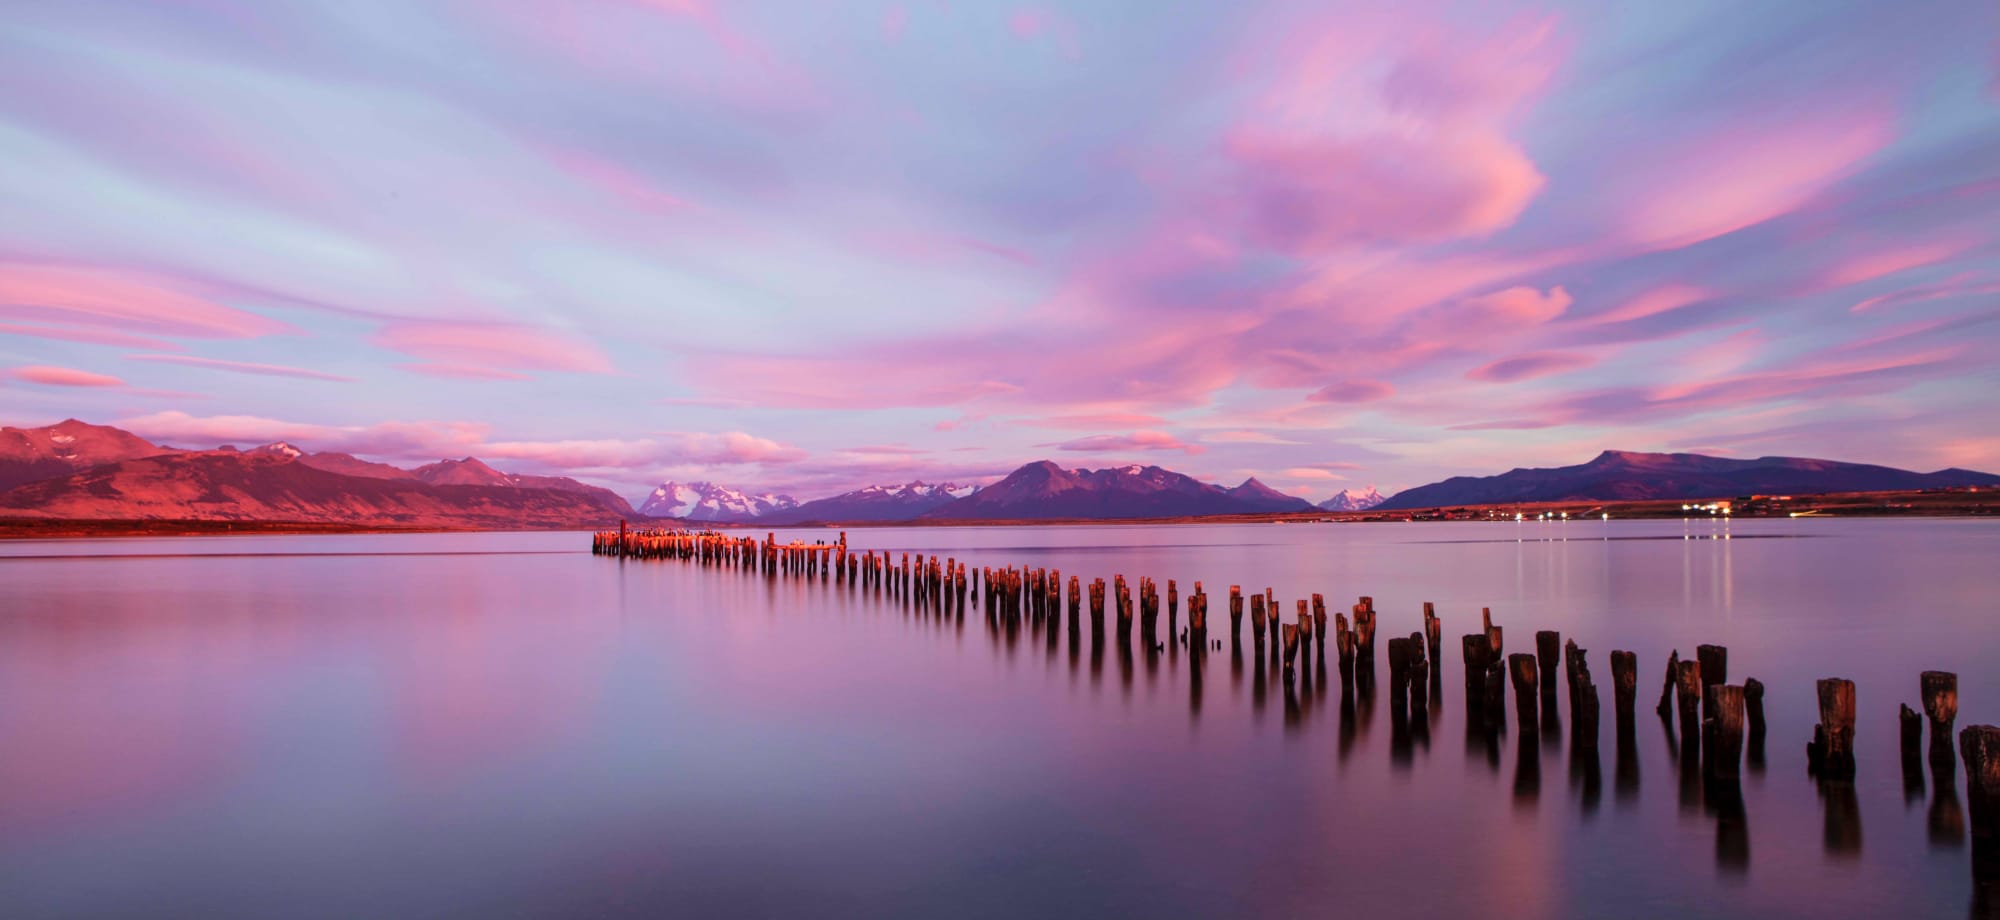 In Chilean Patagonia, the sun is setting over a lake, casting hues of pink, blue and purple over the water. 